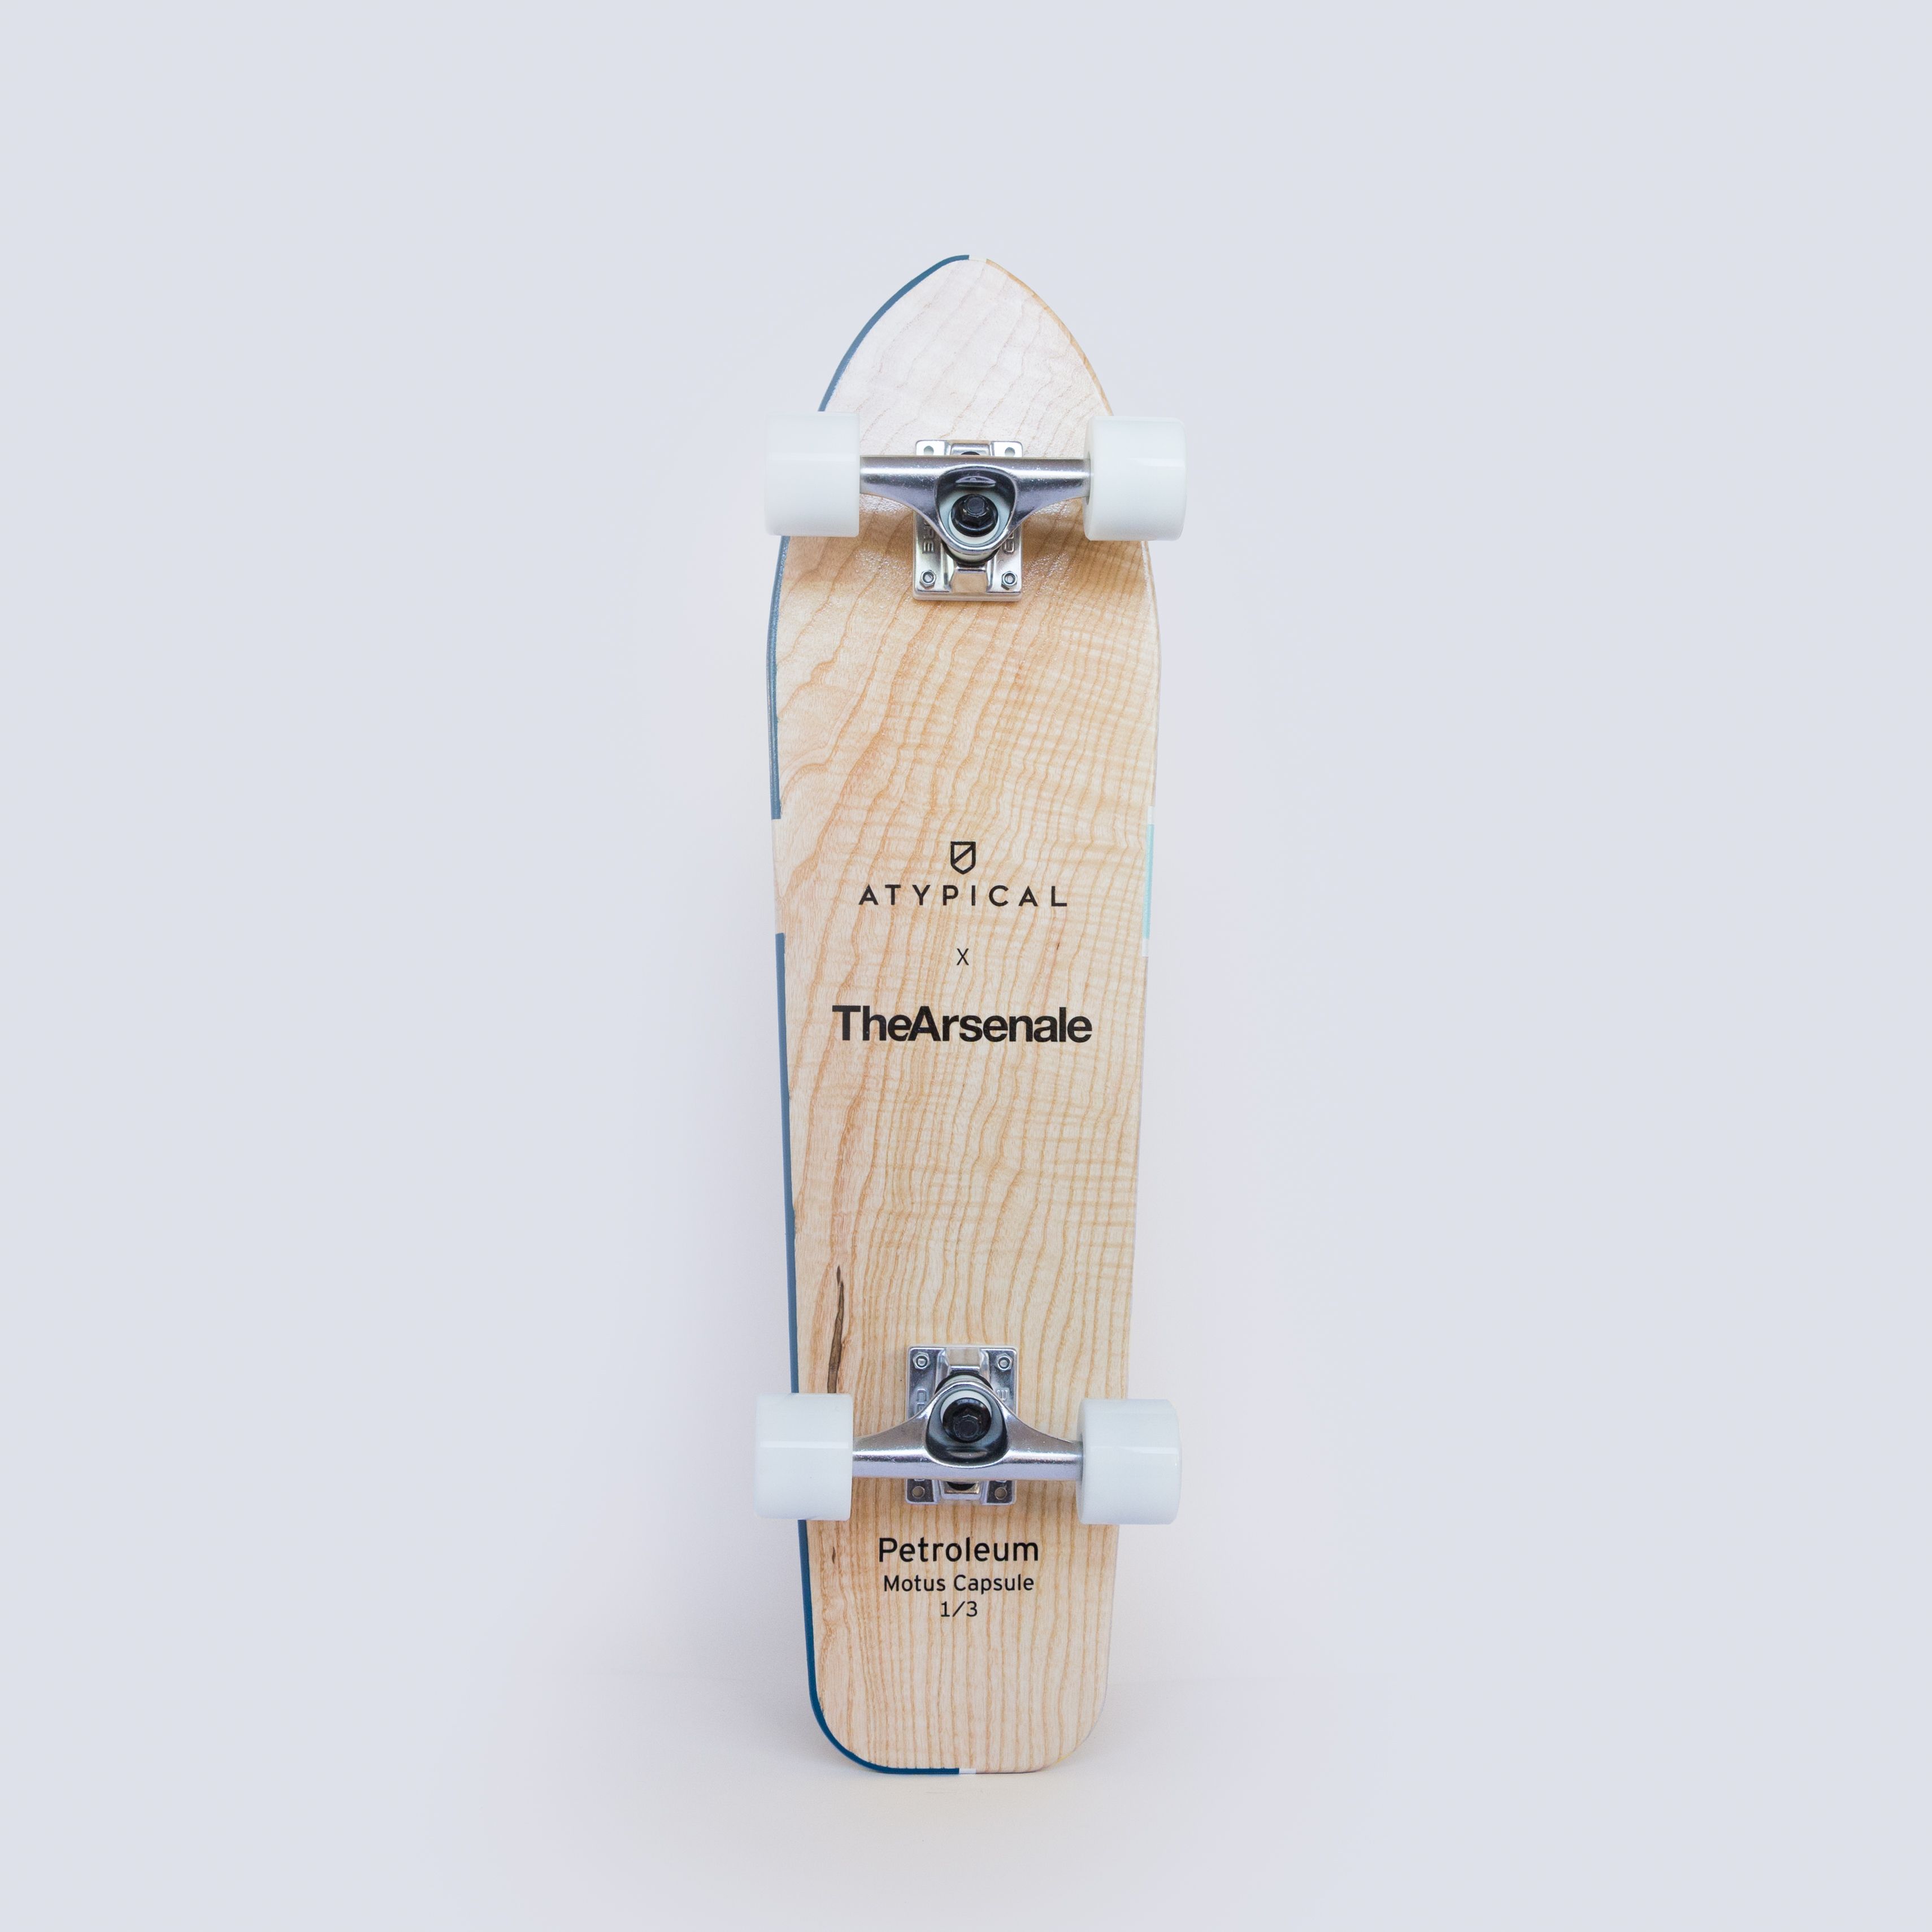 Motus Capsule Collection Skateboards By Atypical 10